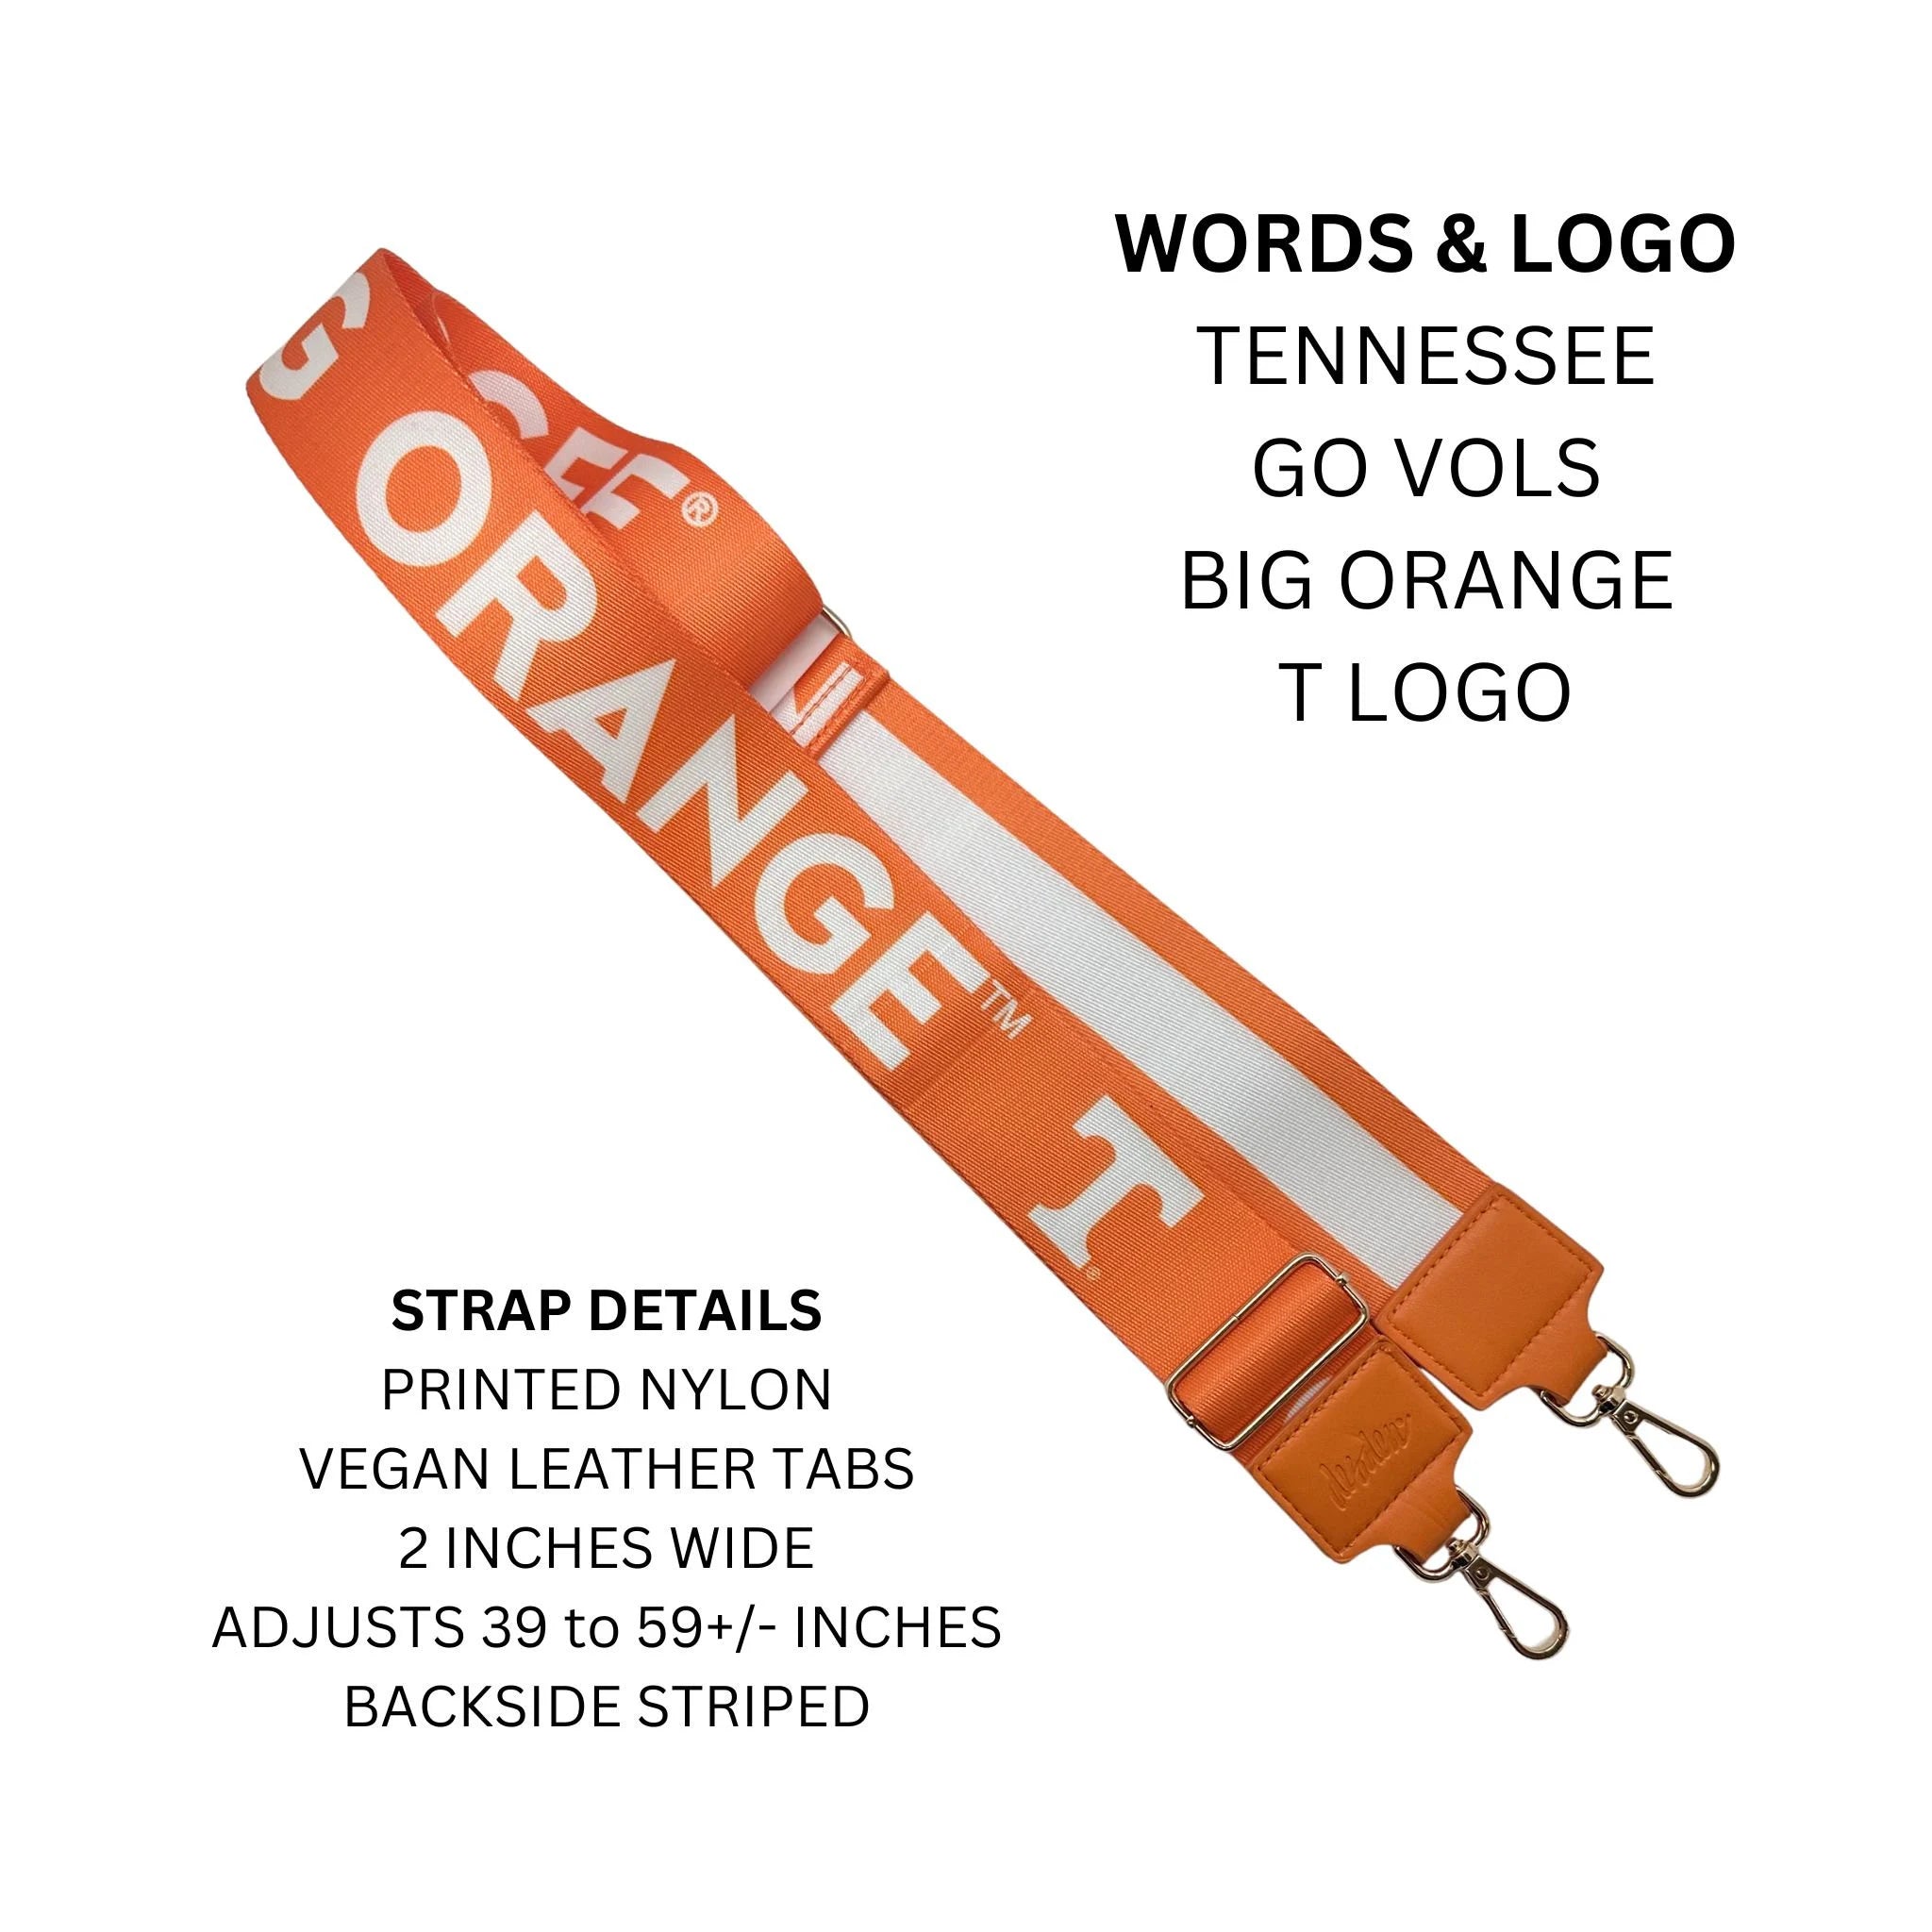 TENNESSEE 2" - Officially Licensed - Stripe